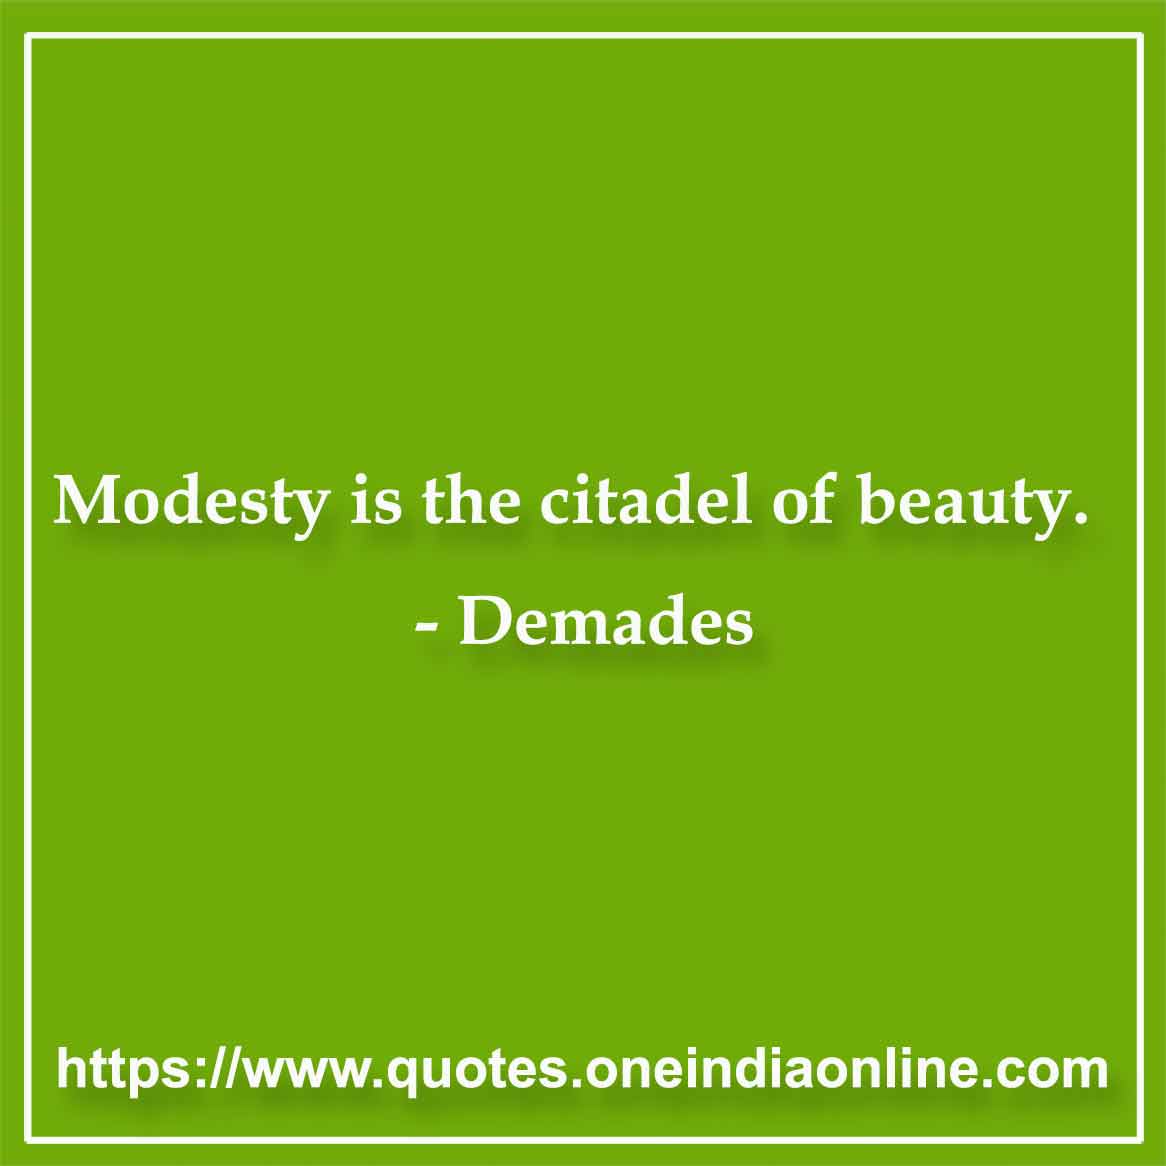 Modesty is the citadel of beauty.

- Humility Quotes by Demades